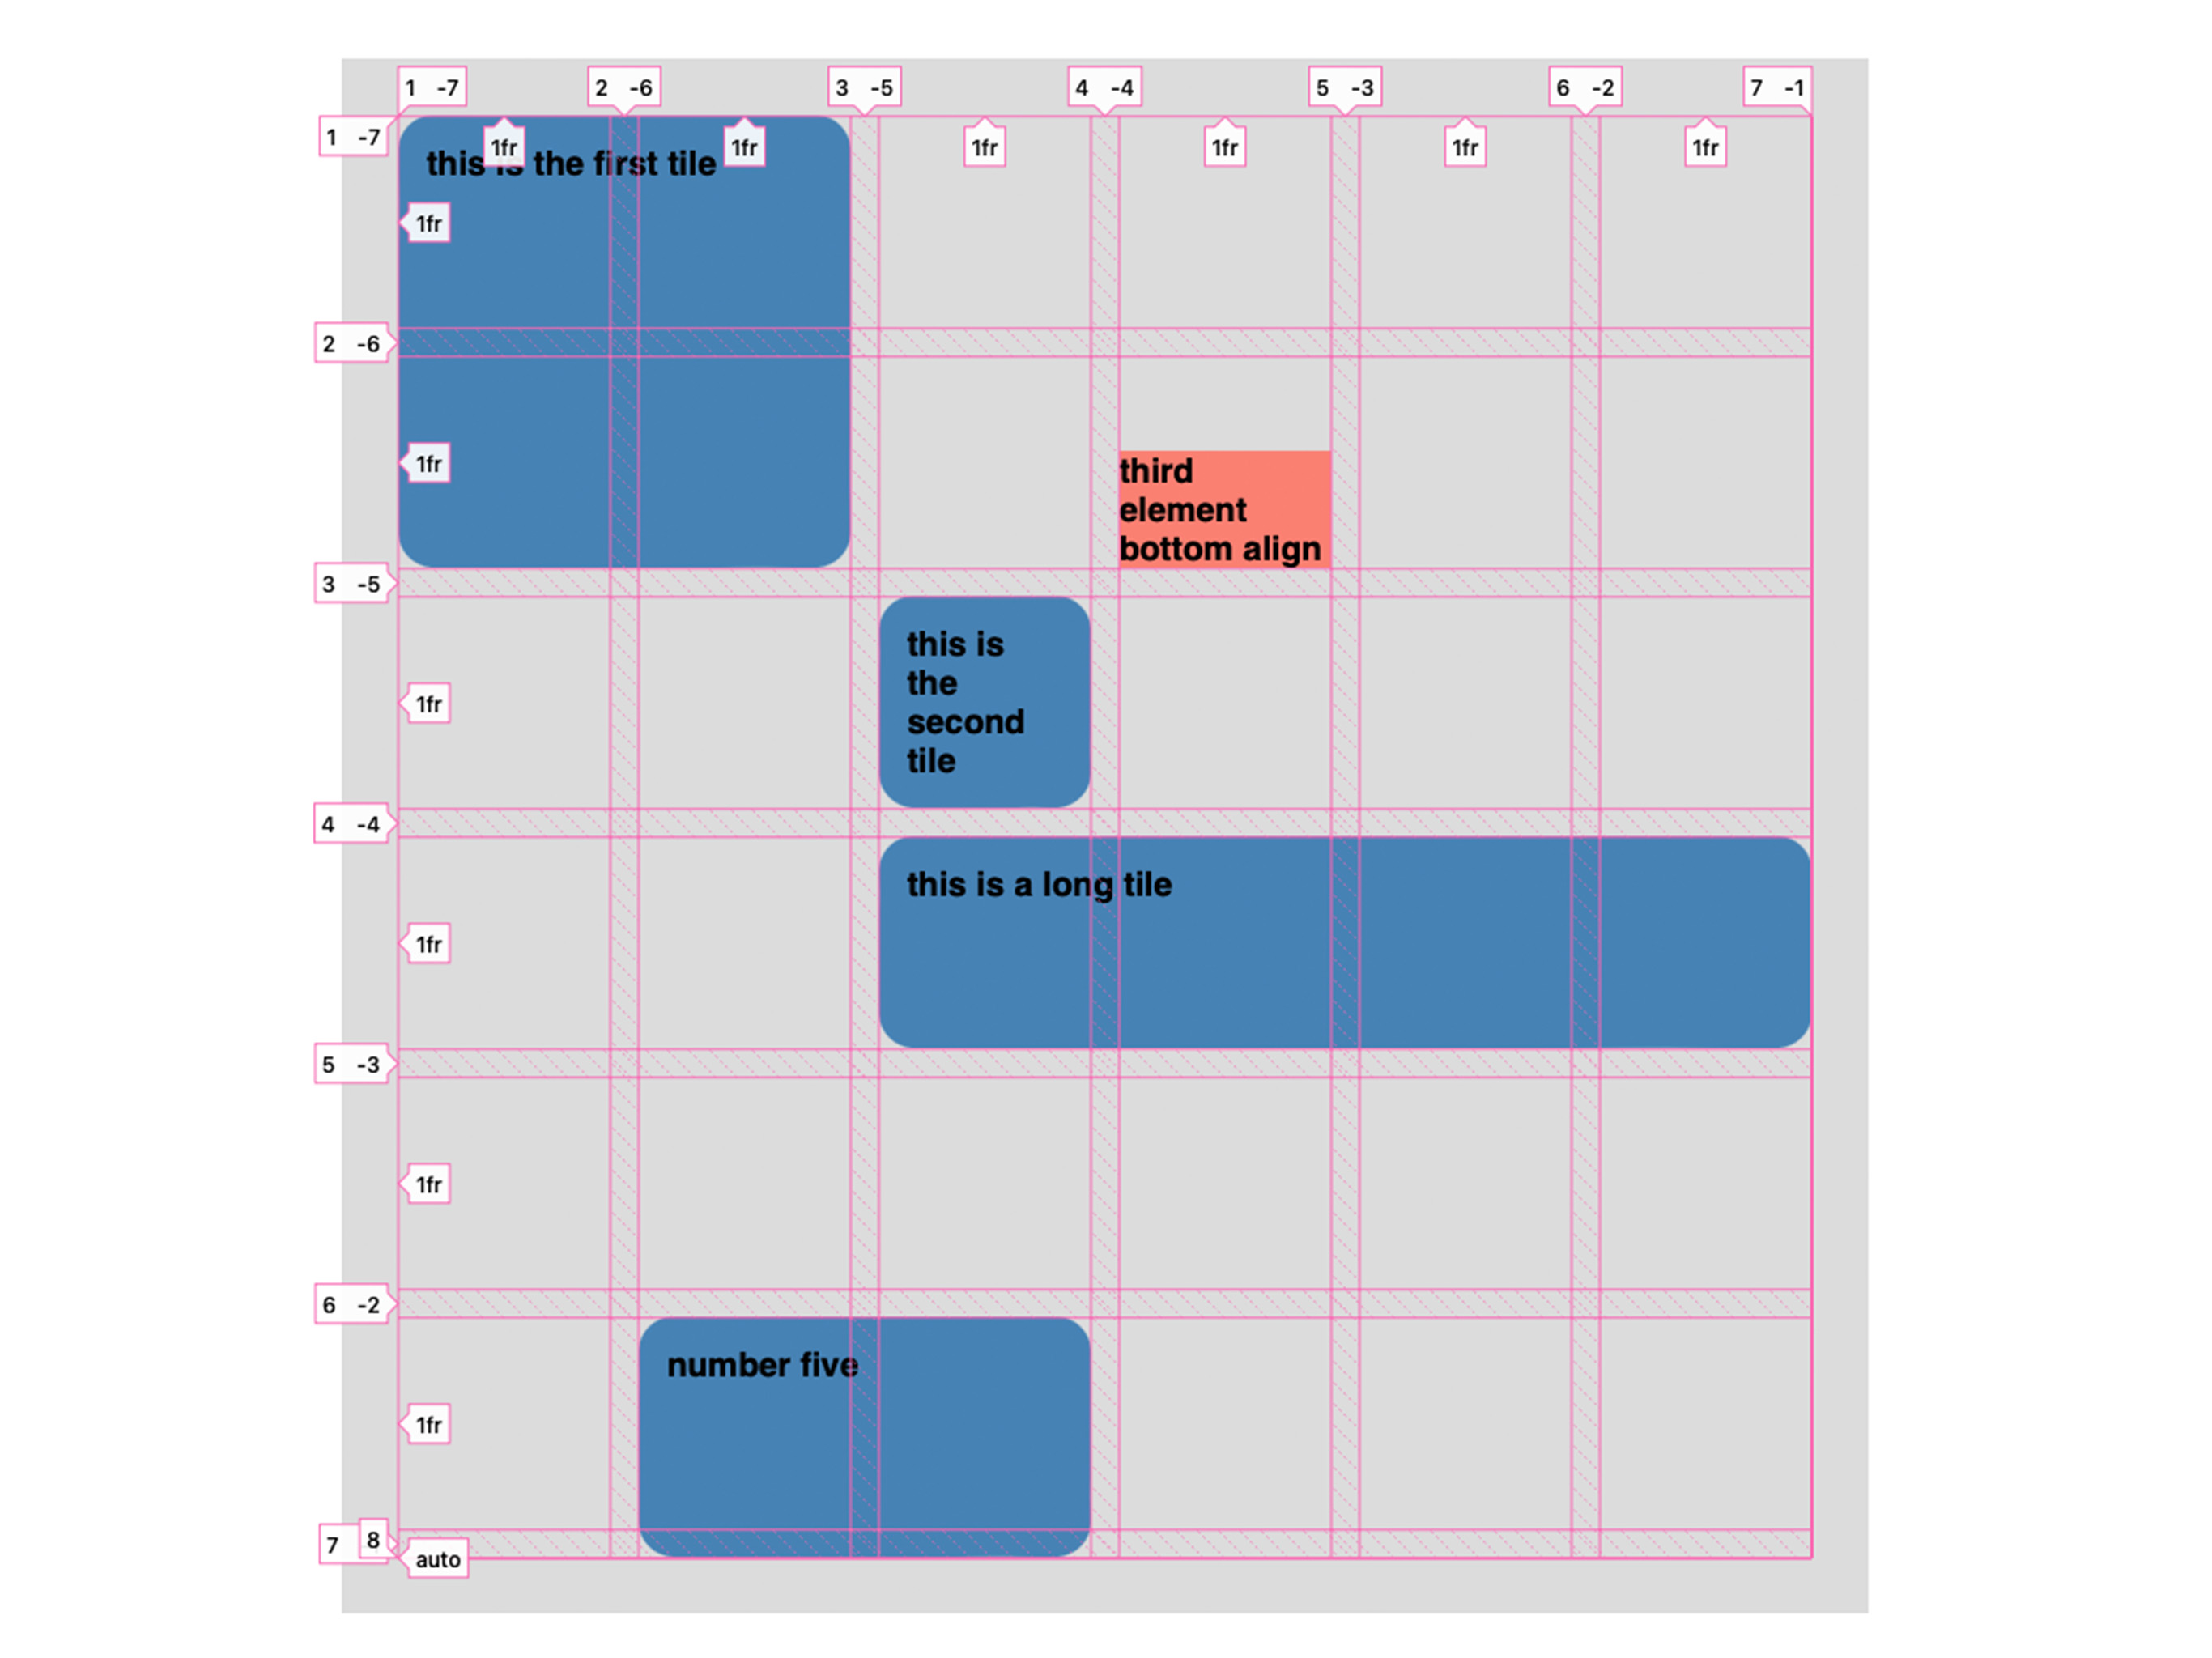 CSS Grid Layout